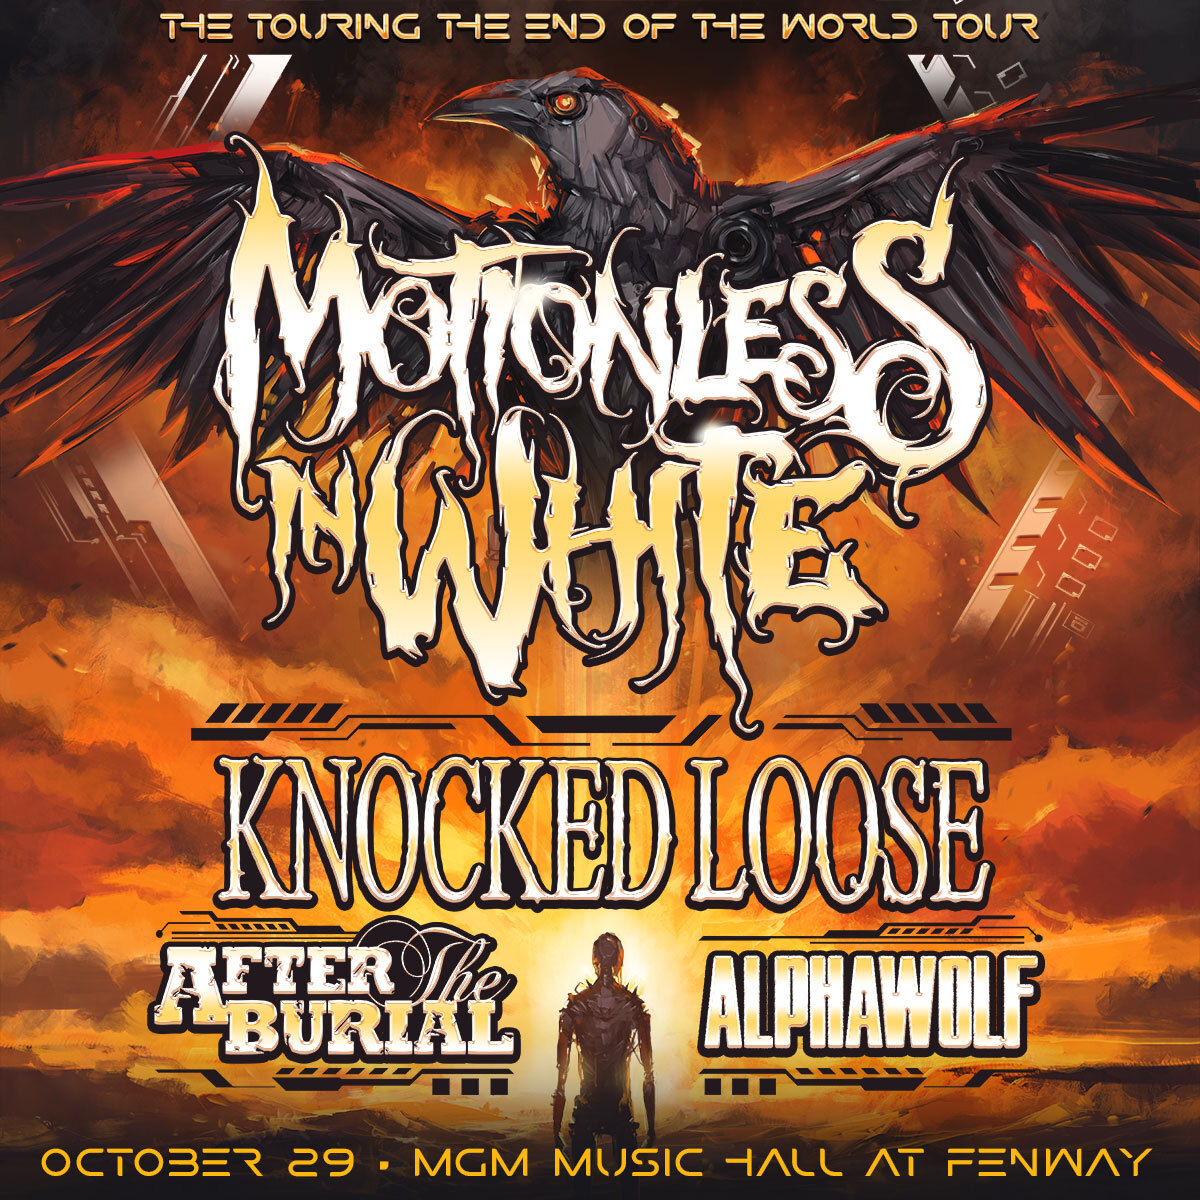 Win Tickets To MOTIONLESS IN WHITE: The Touring The End Of The World Tour at the MGM Music Hall at Fenway